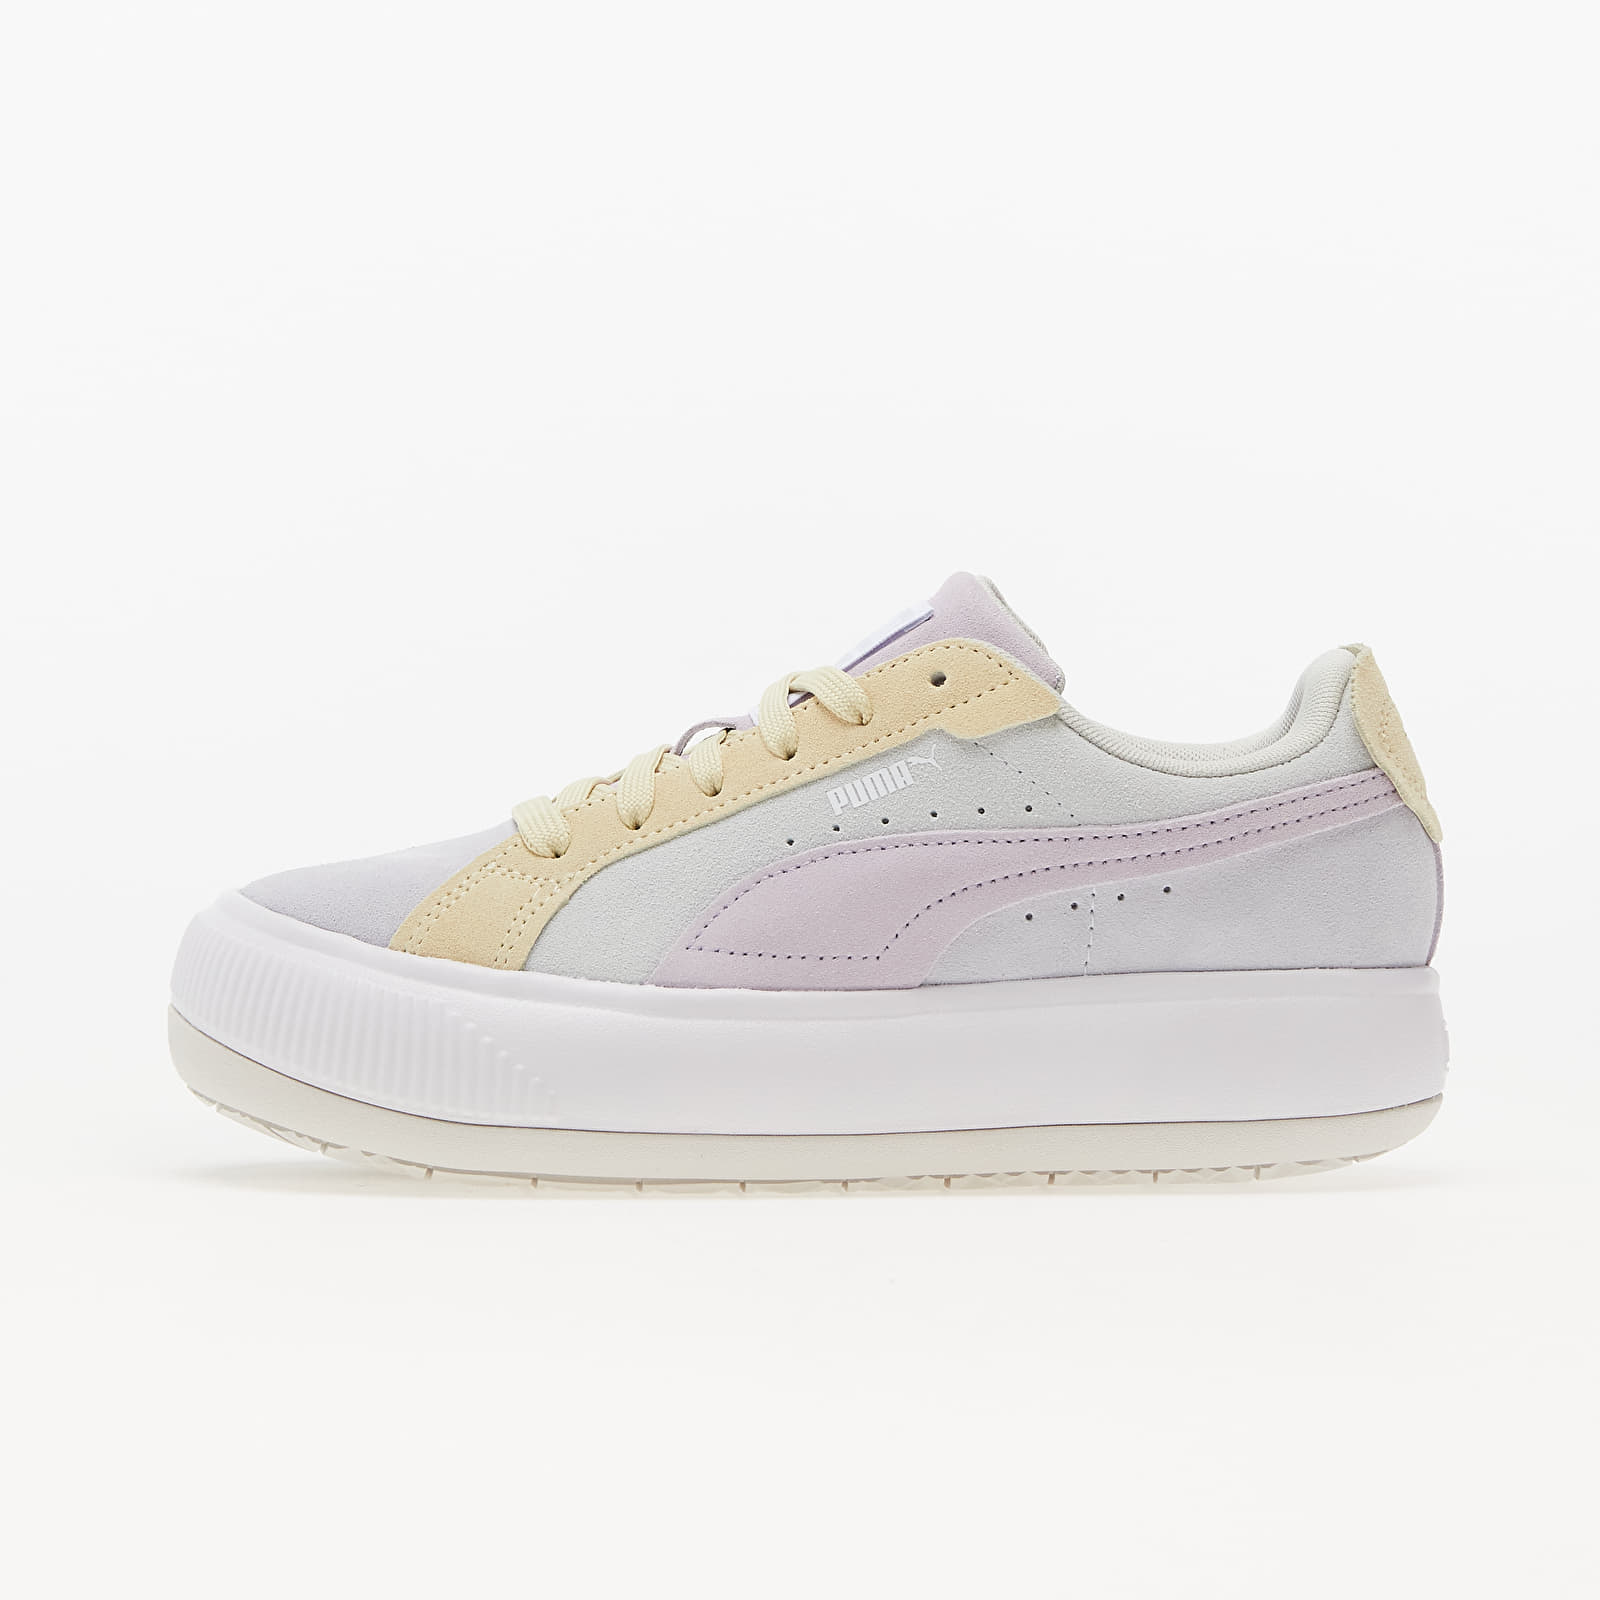 Women's shoes Puma Suede Mayu Raw Wns Ice Flow/ White